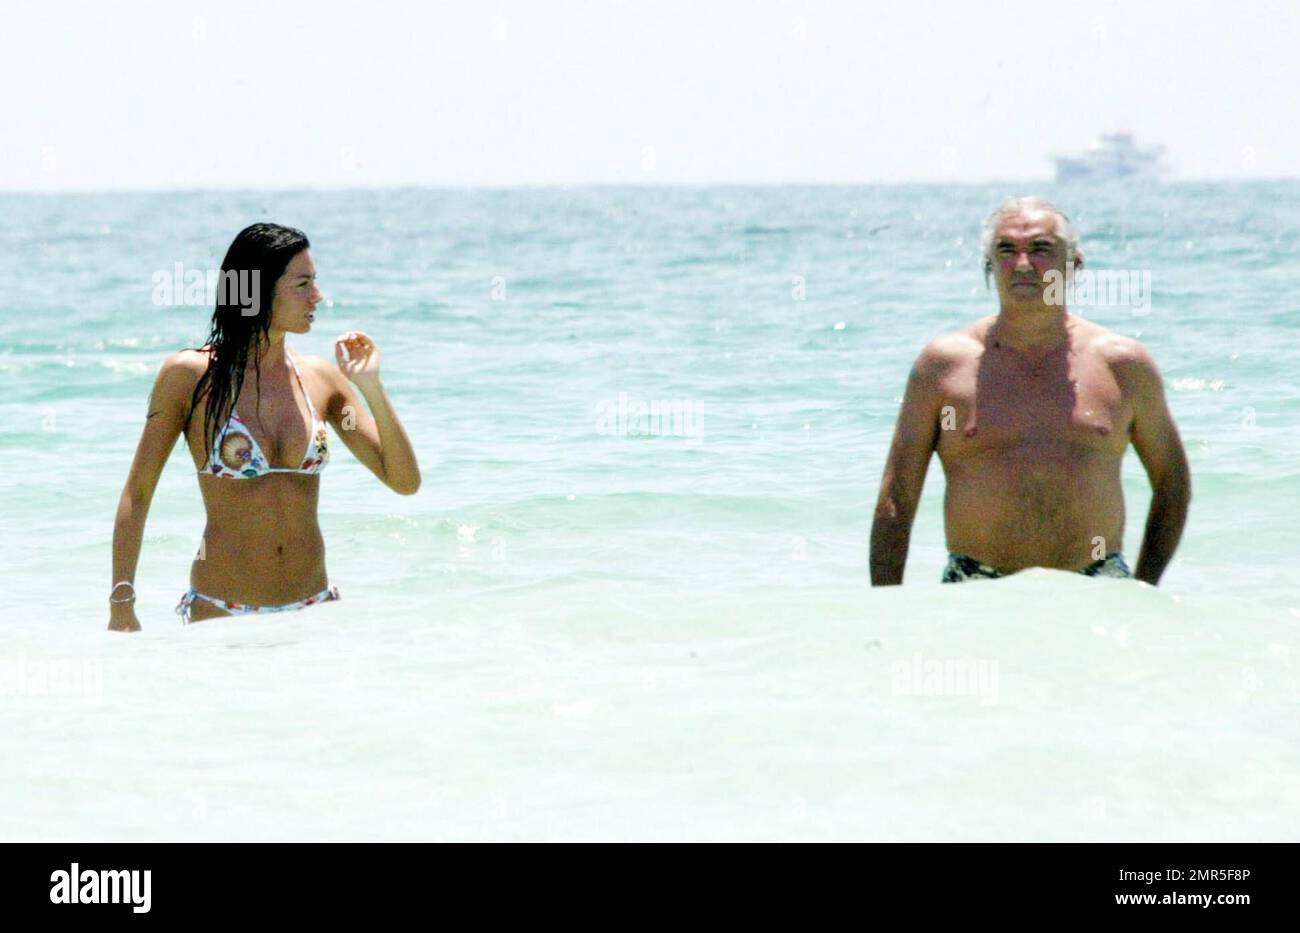 Exclusive!! Formula One Renault Boss Flavio Briatore and model girlfriend Elisabetta Gregoraci get playful on a recent trip to Florida. The pair got hot and heavy under the sun on Miami Beach and cooled off in the Ocean before returning to their hotel. Miami, Fla. 6/12/07. Stock Photo